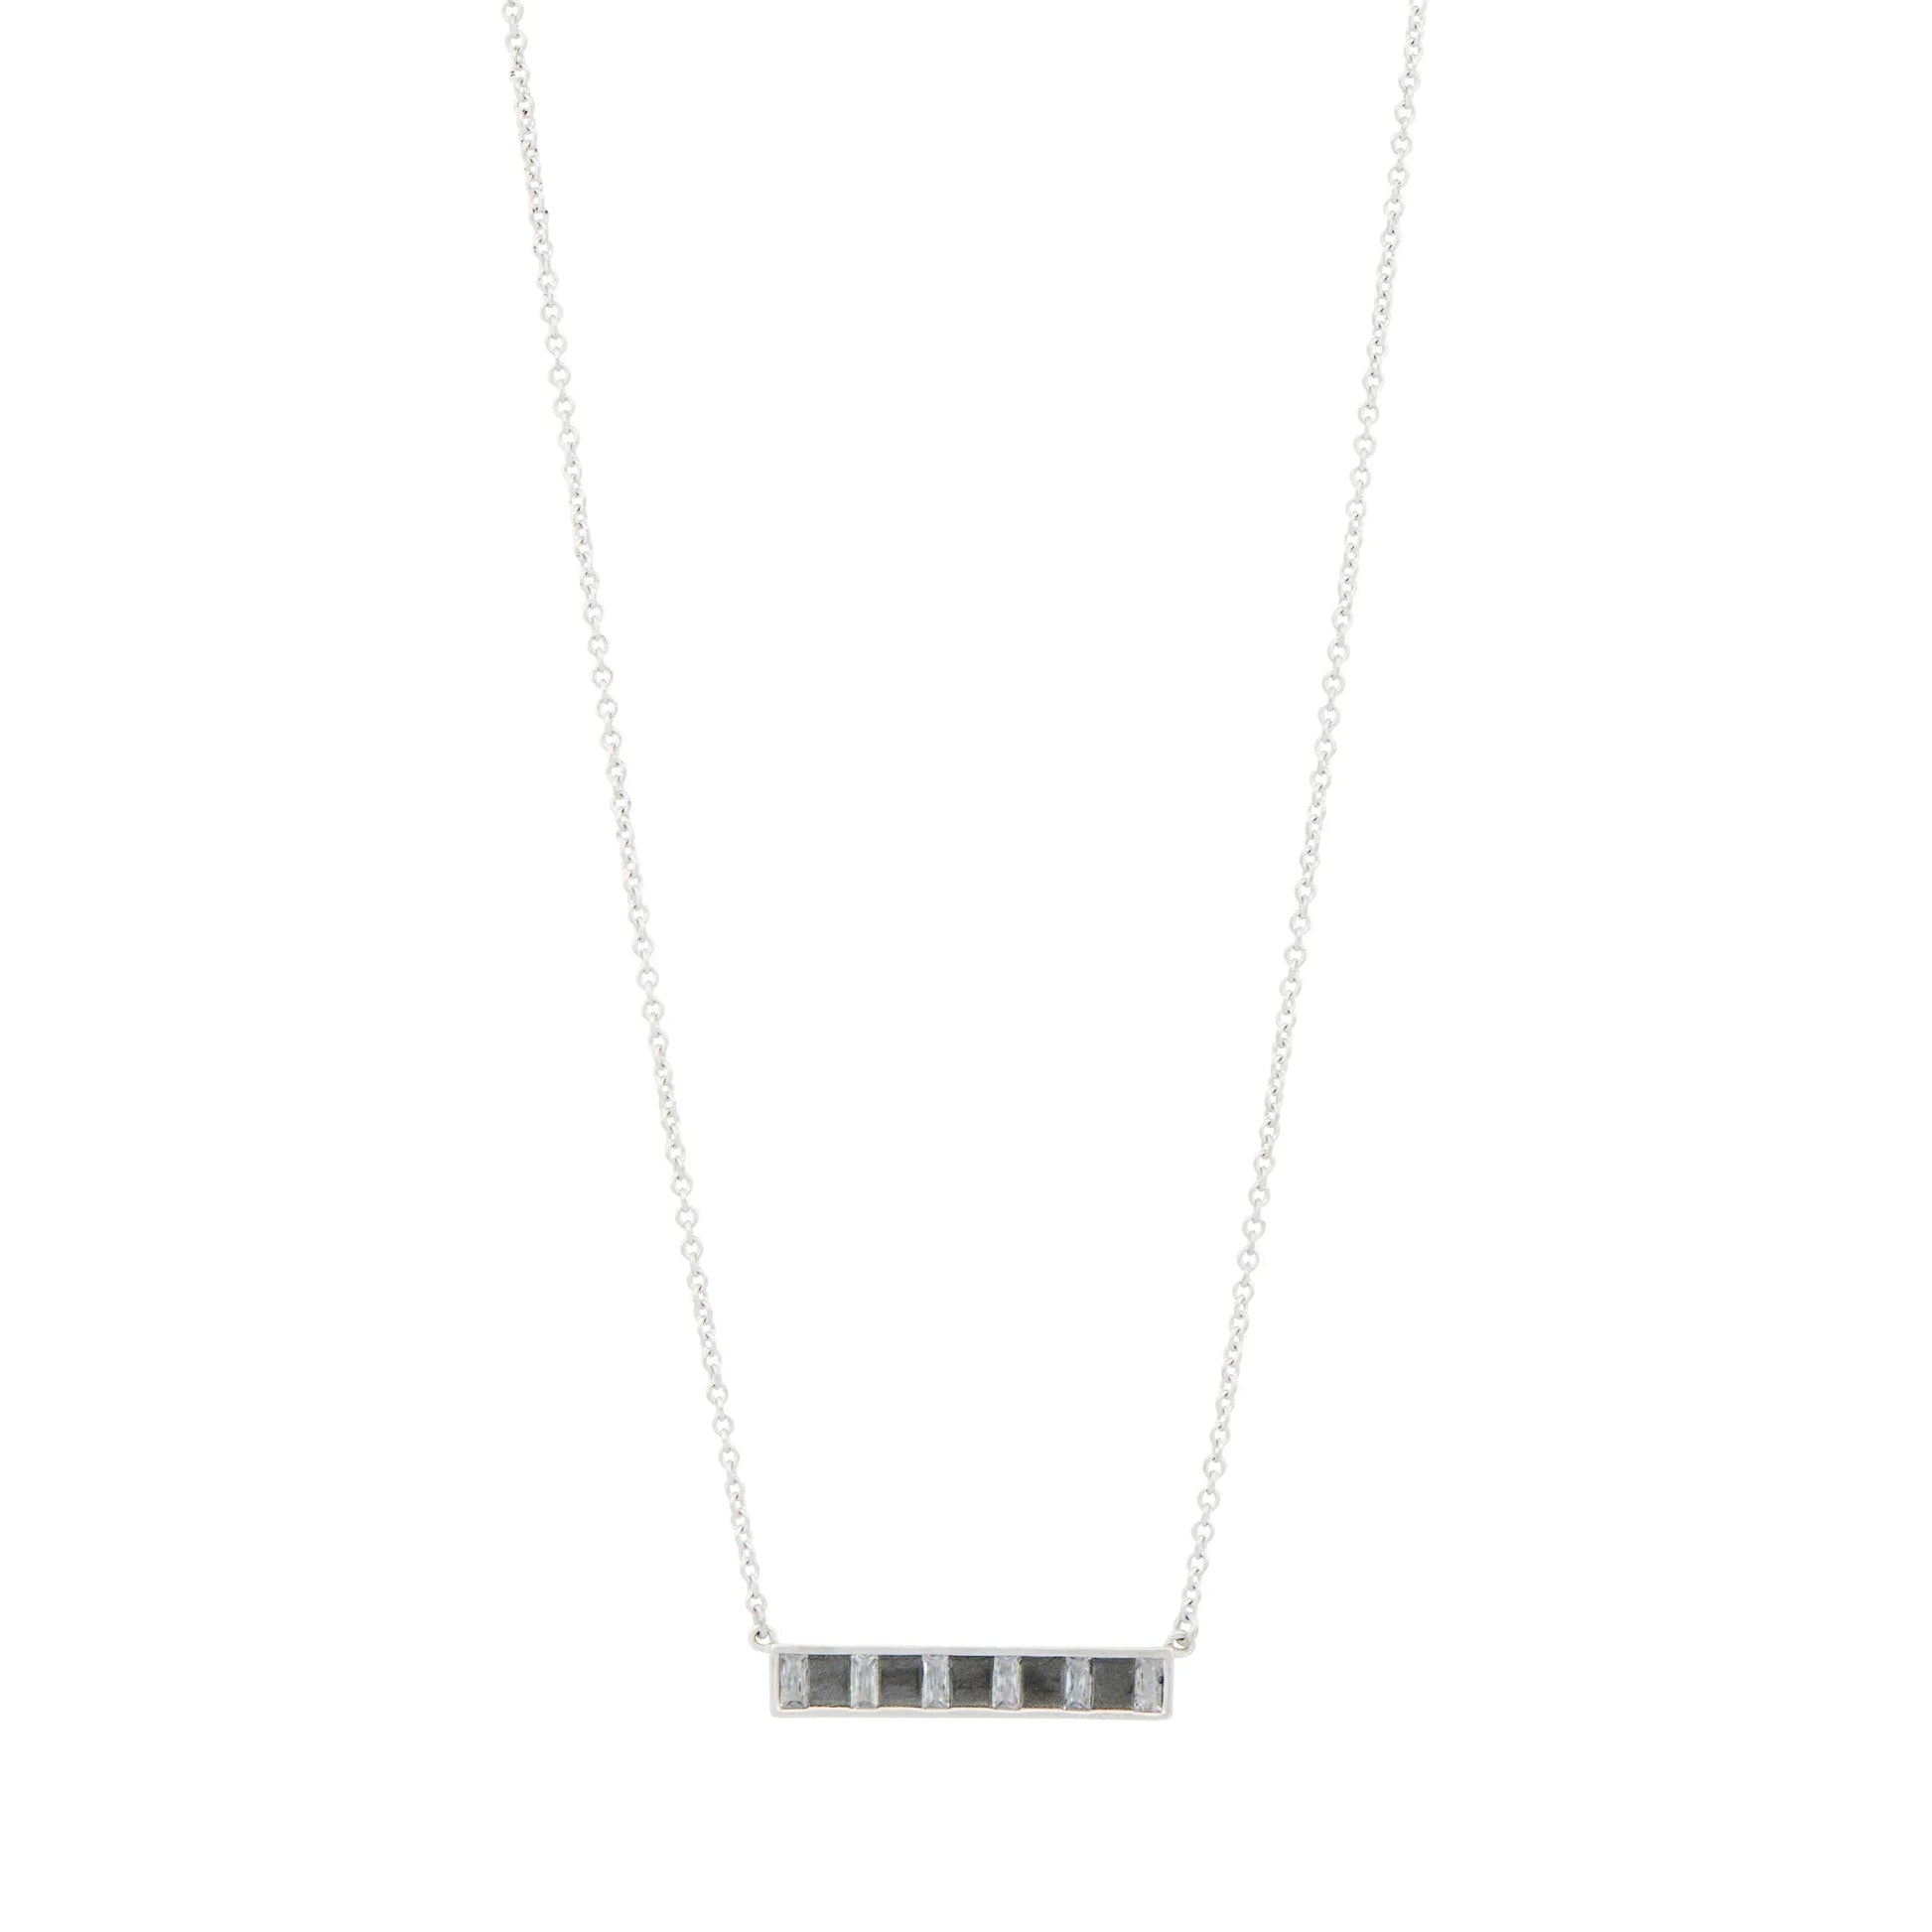  Cobblestone Bar Necklace Industrial Finish NECKLACE